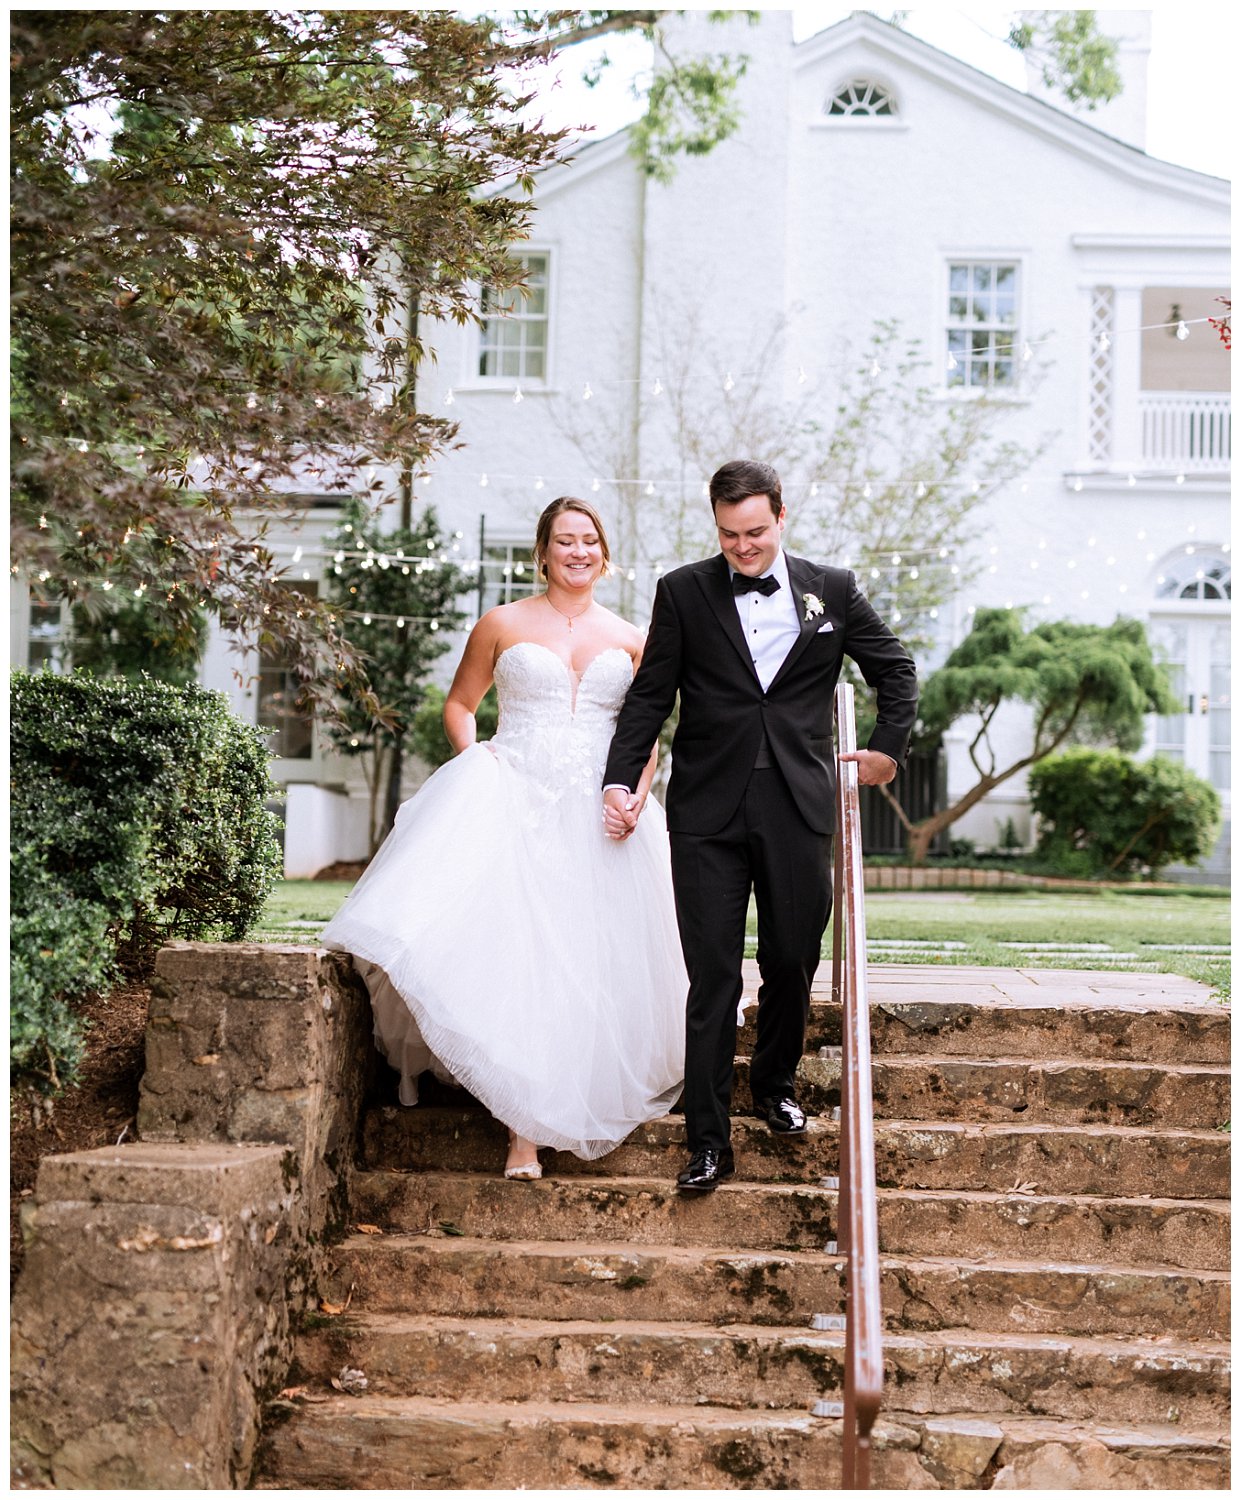 Bride and groom reception entrance at their colorful summer wedding in Charlottesville, Virginia